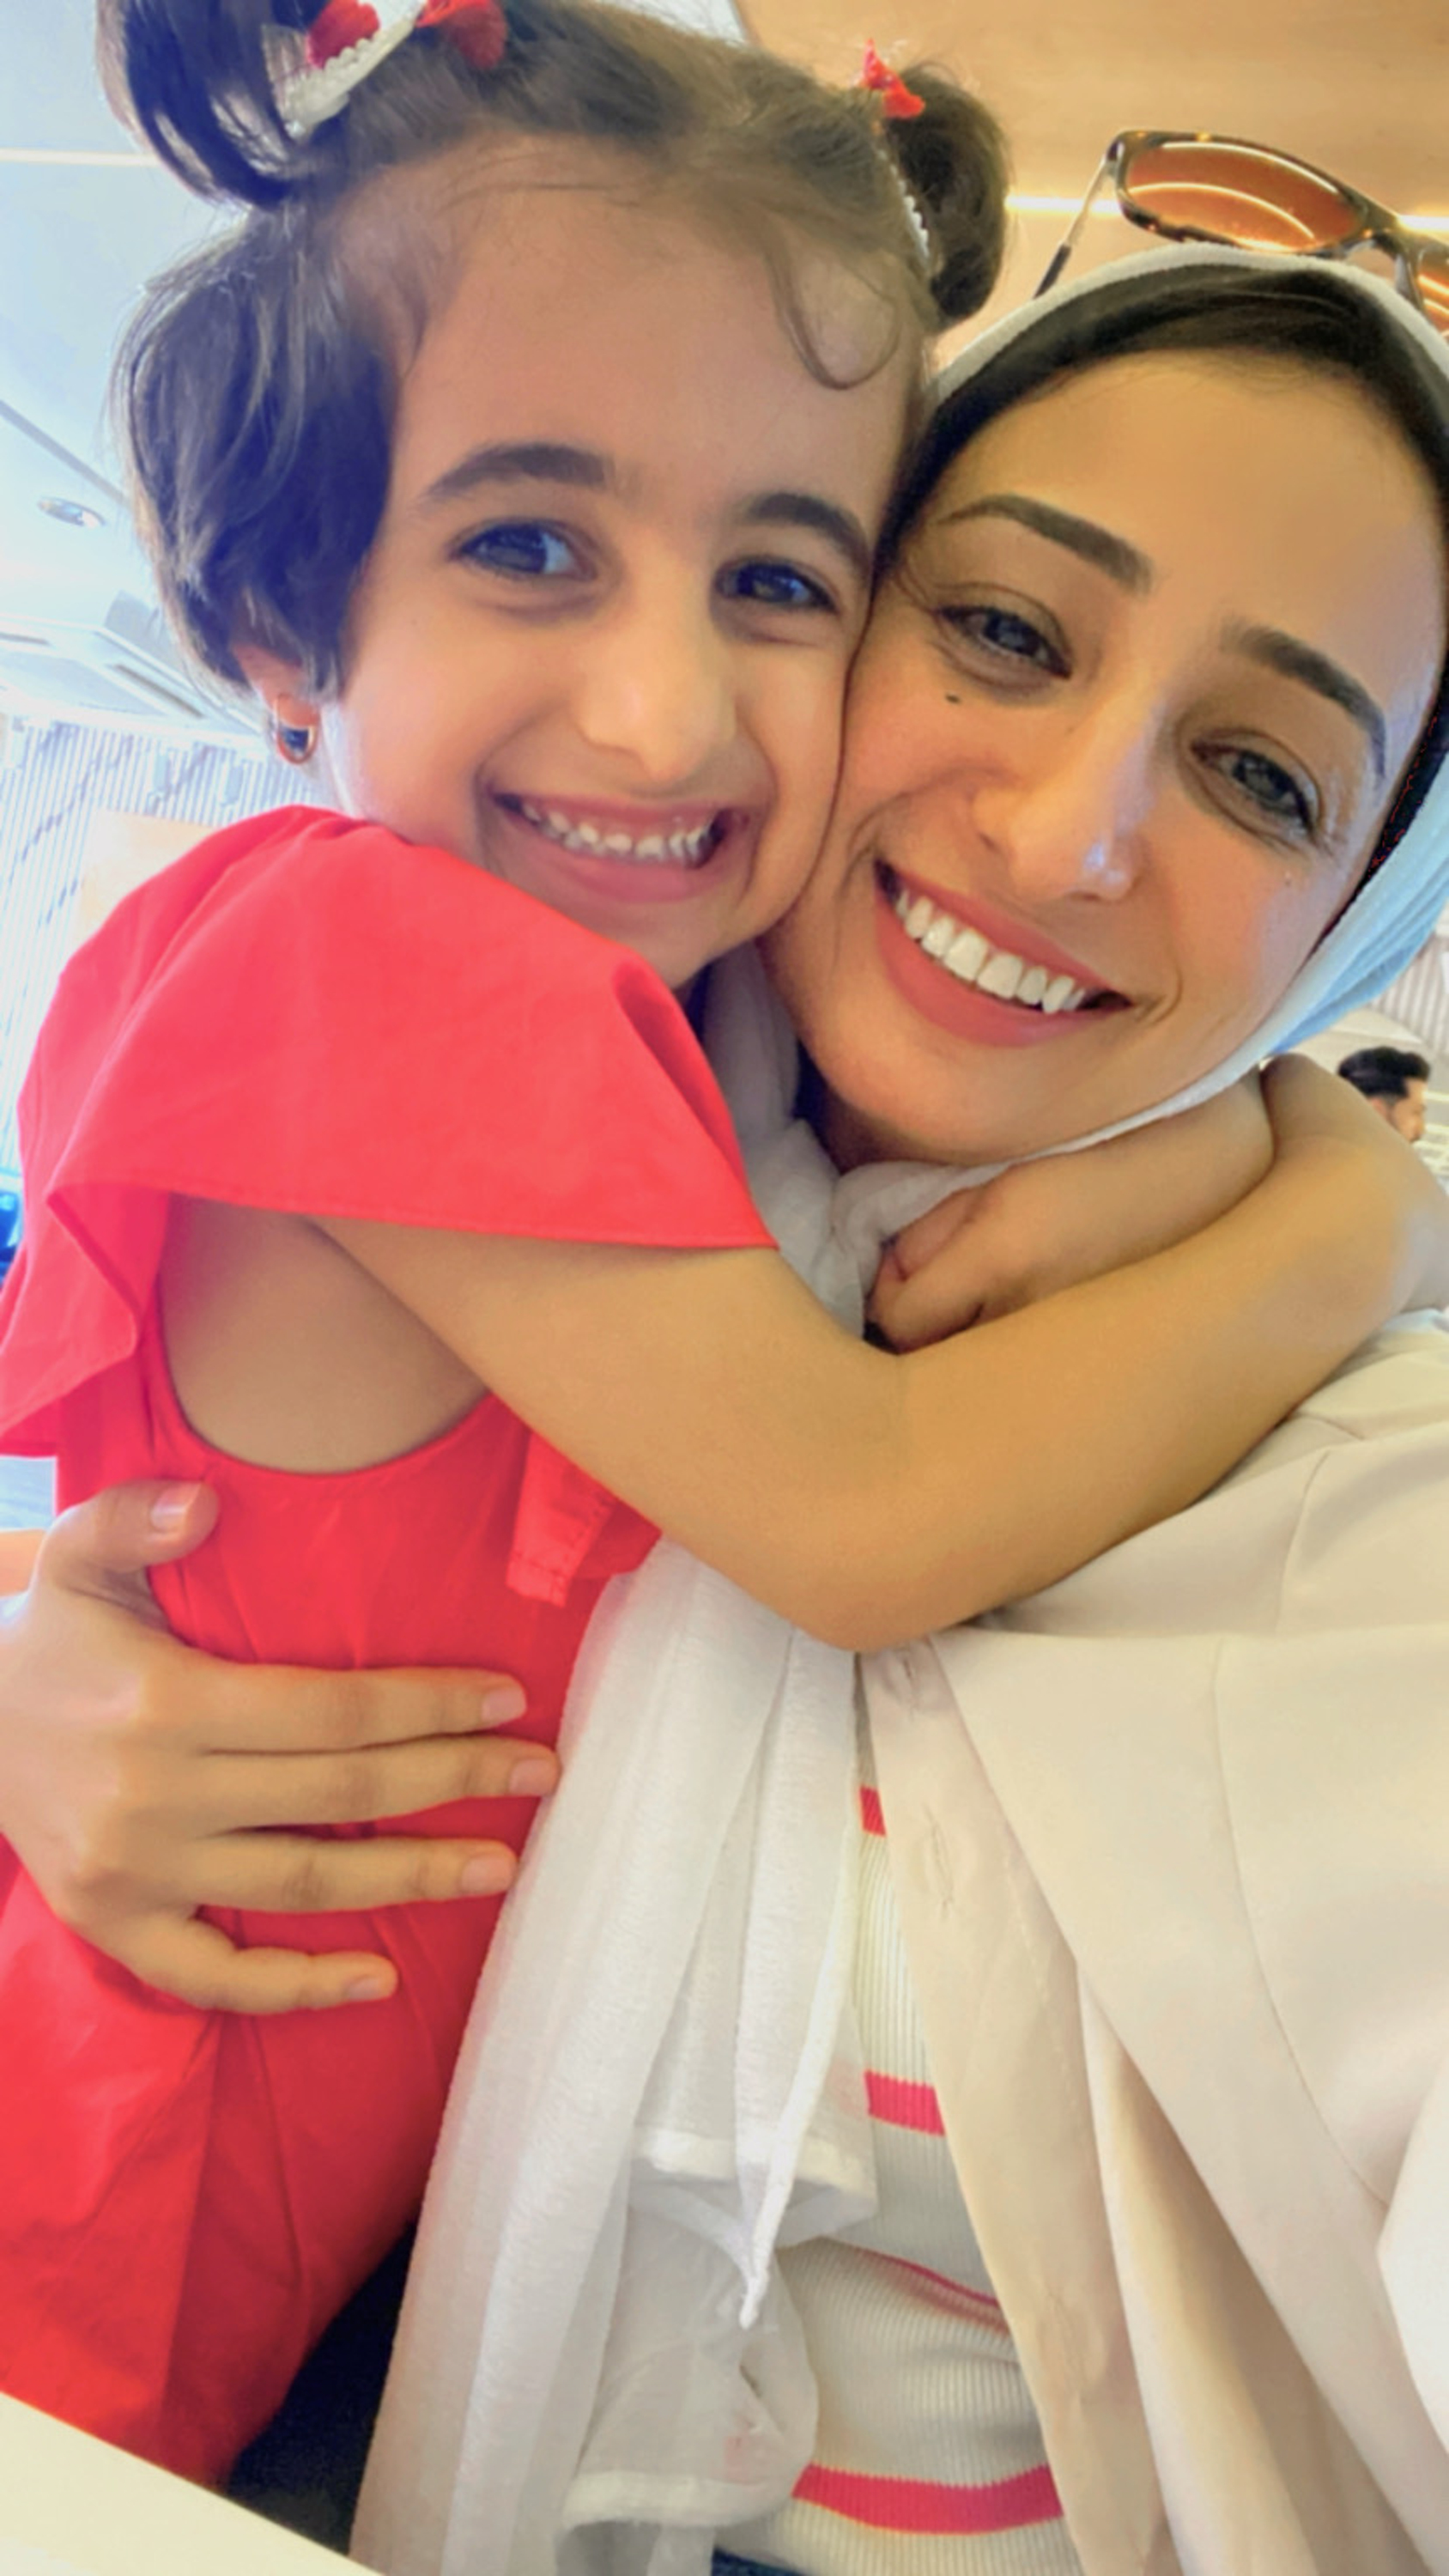 Israa and her daughter Marlin hugging and smiling at the camera